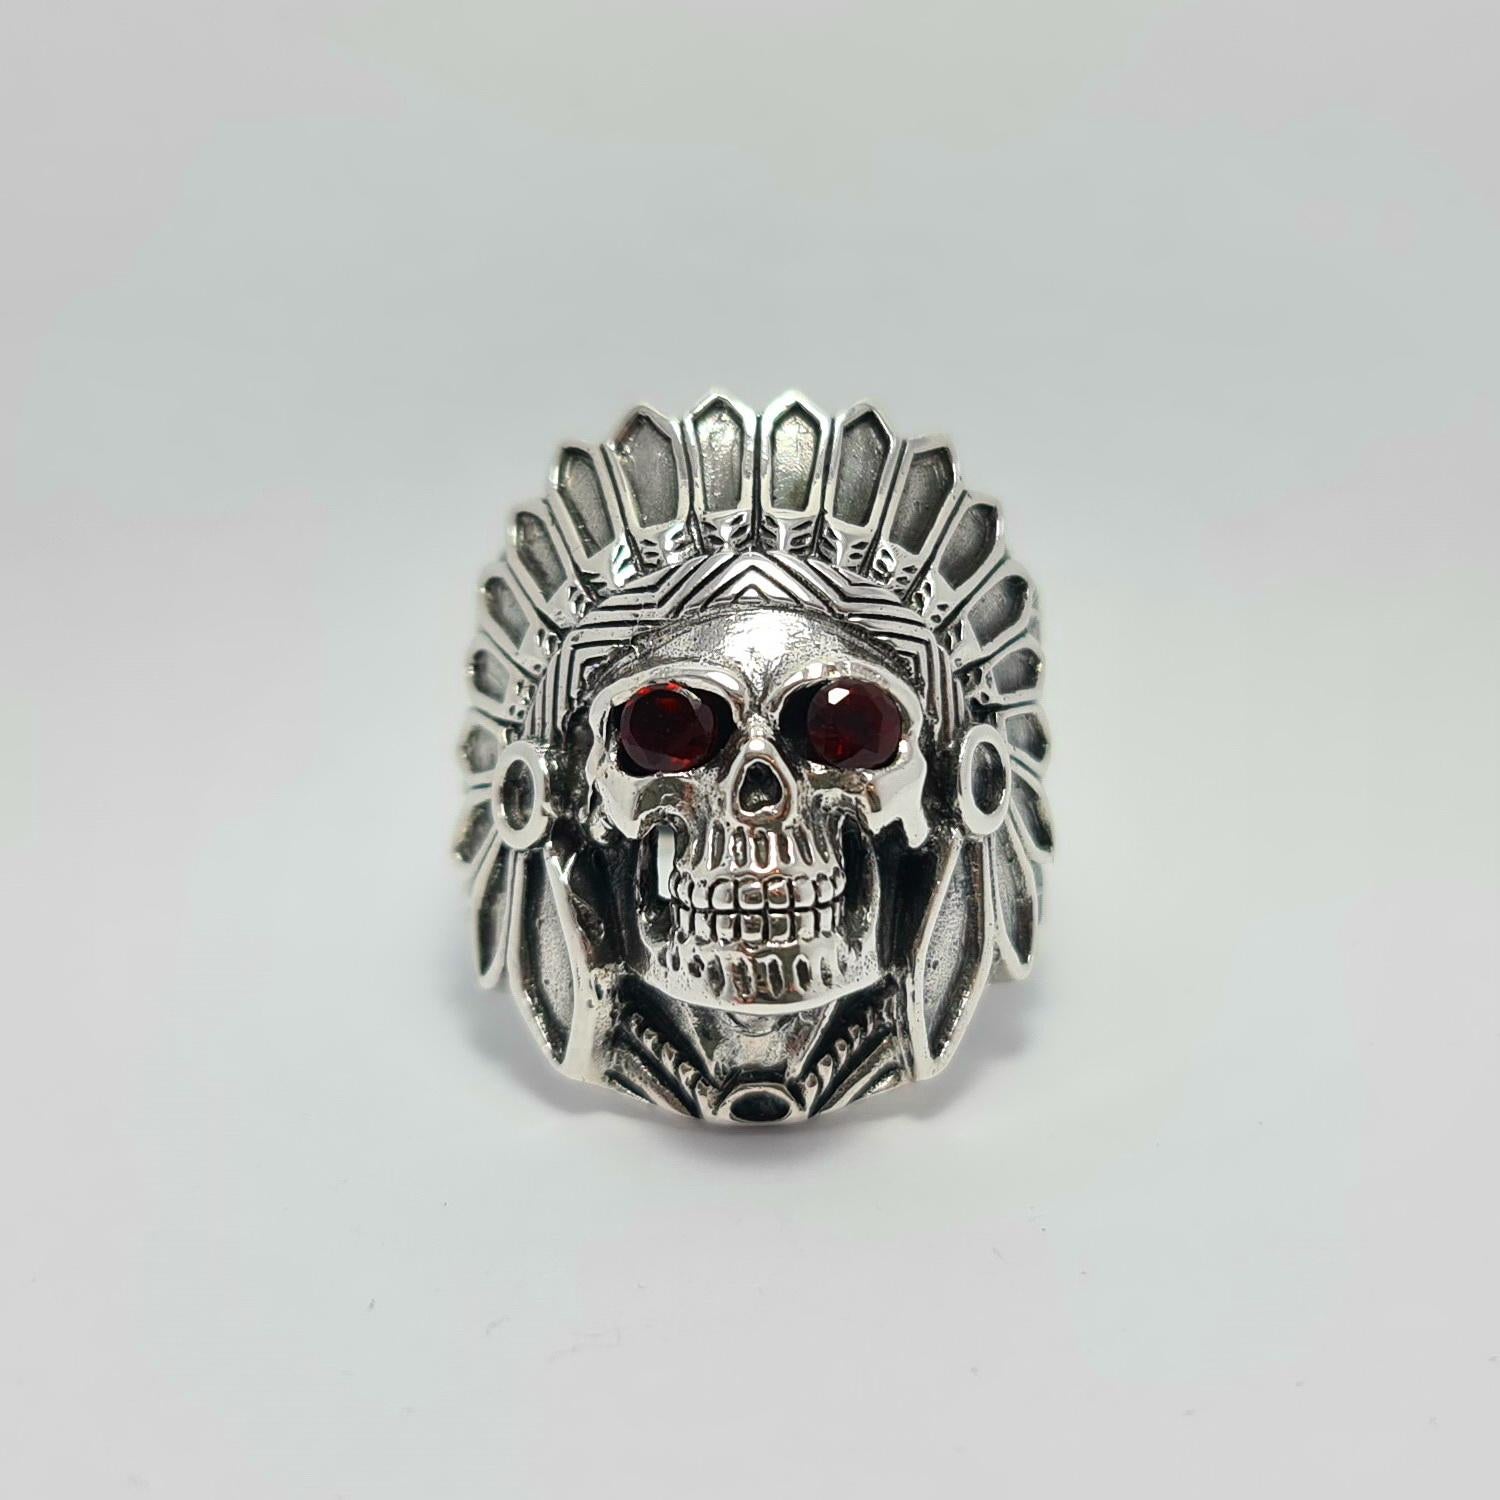 Garnet Eyes American Indian Skull Tribal Chief Warrior Ring Sterling Silver 925 For Sale 7